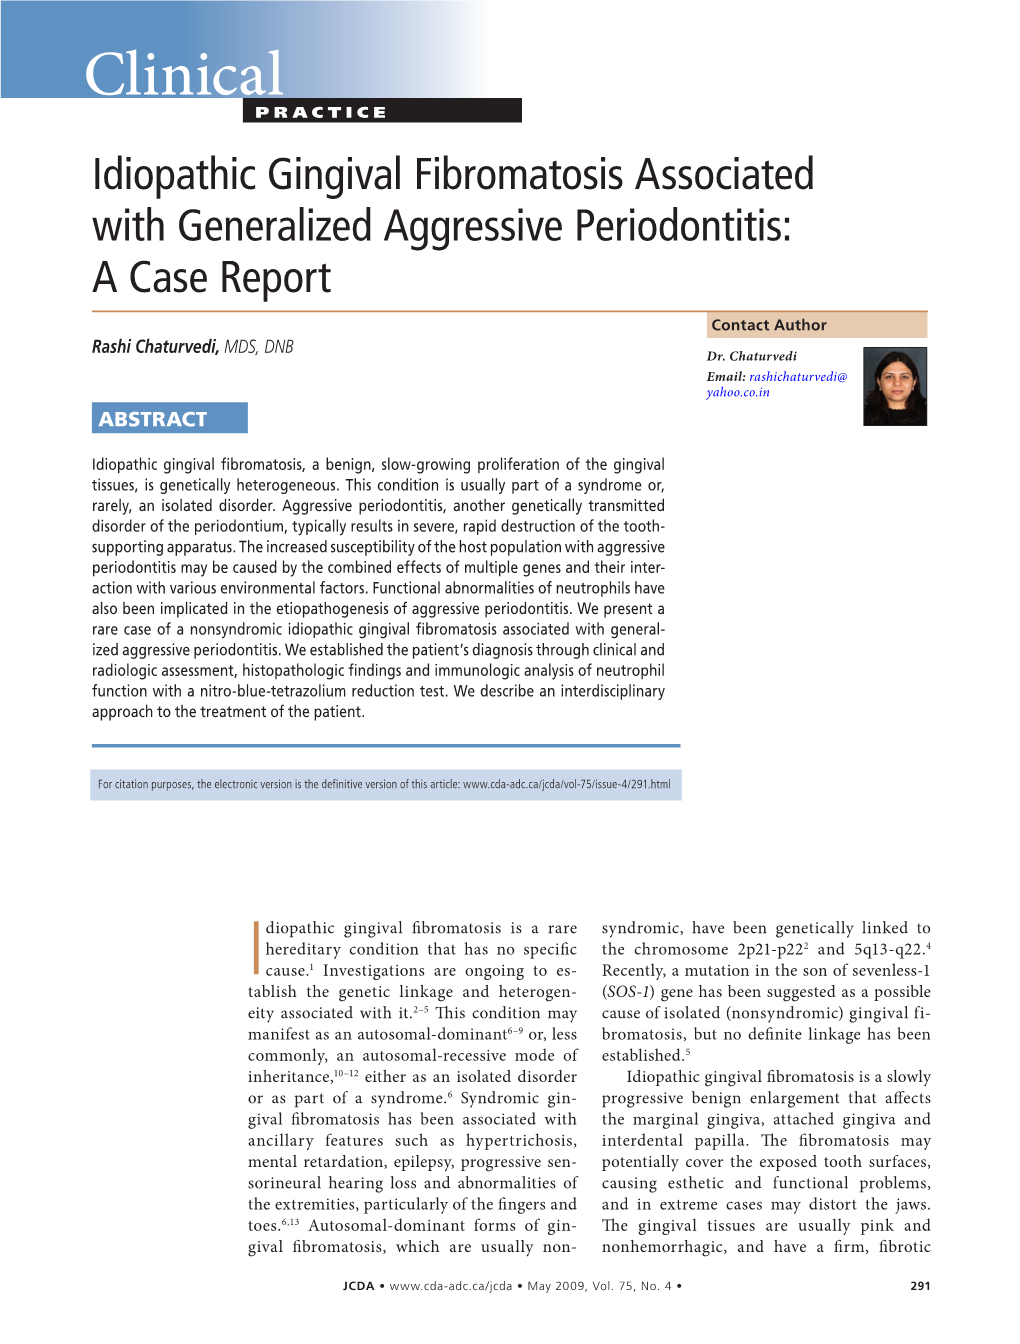 Idiopathic Gingival Fibromatosis Associated with Generalized Aggressive Periodontitis: a Case Report